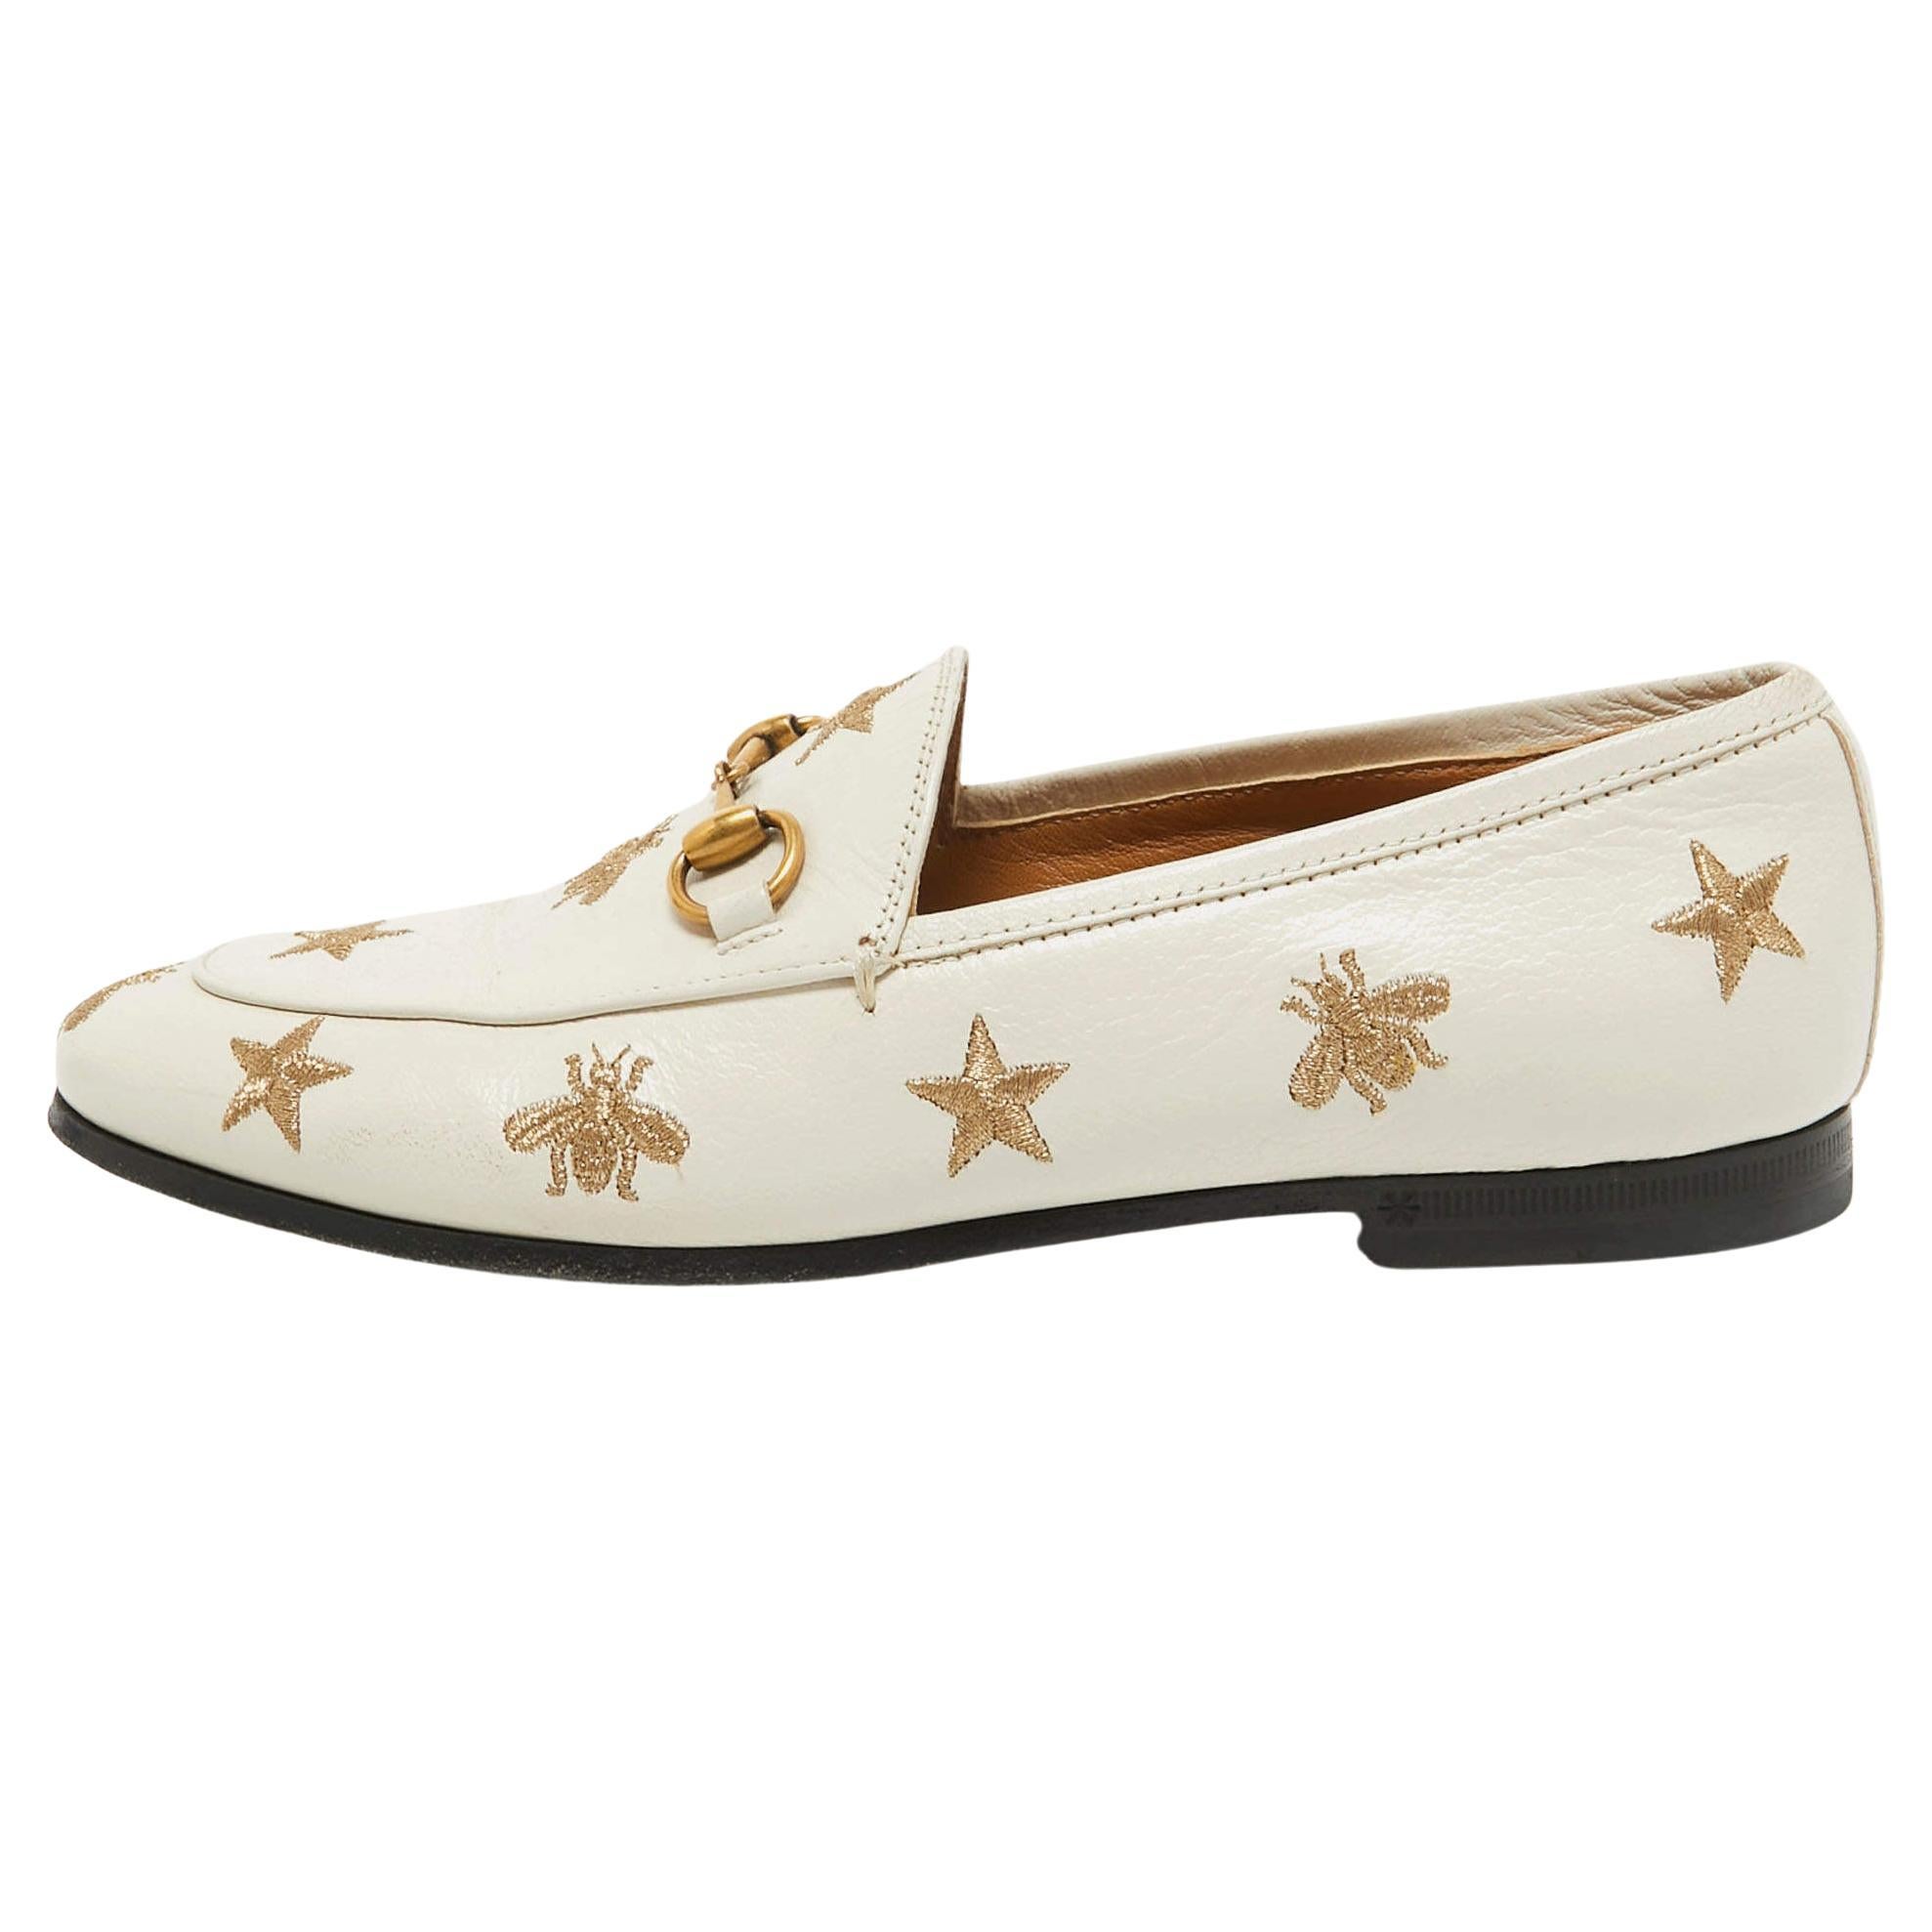 Gucci Cream Leather Jordaan Embroidered Bee Horsebit Slip On Loafers Size 35 For Sale